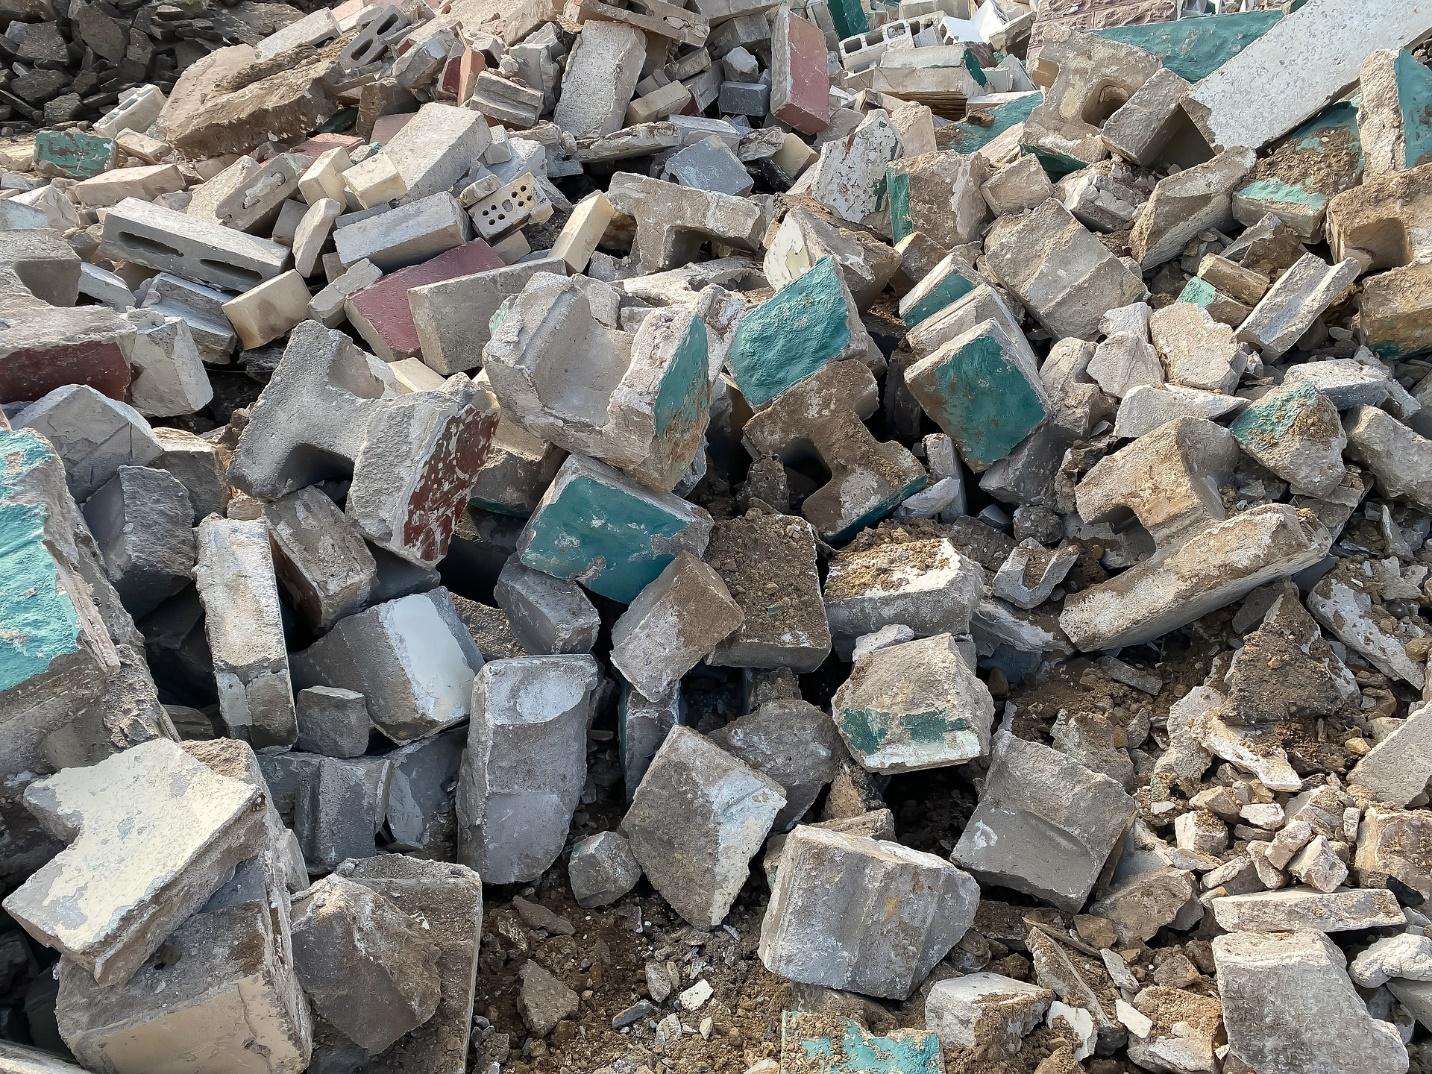 A pile of bricks in a pile of dirt used for construction purposes.